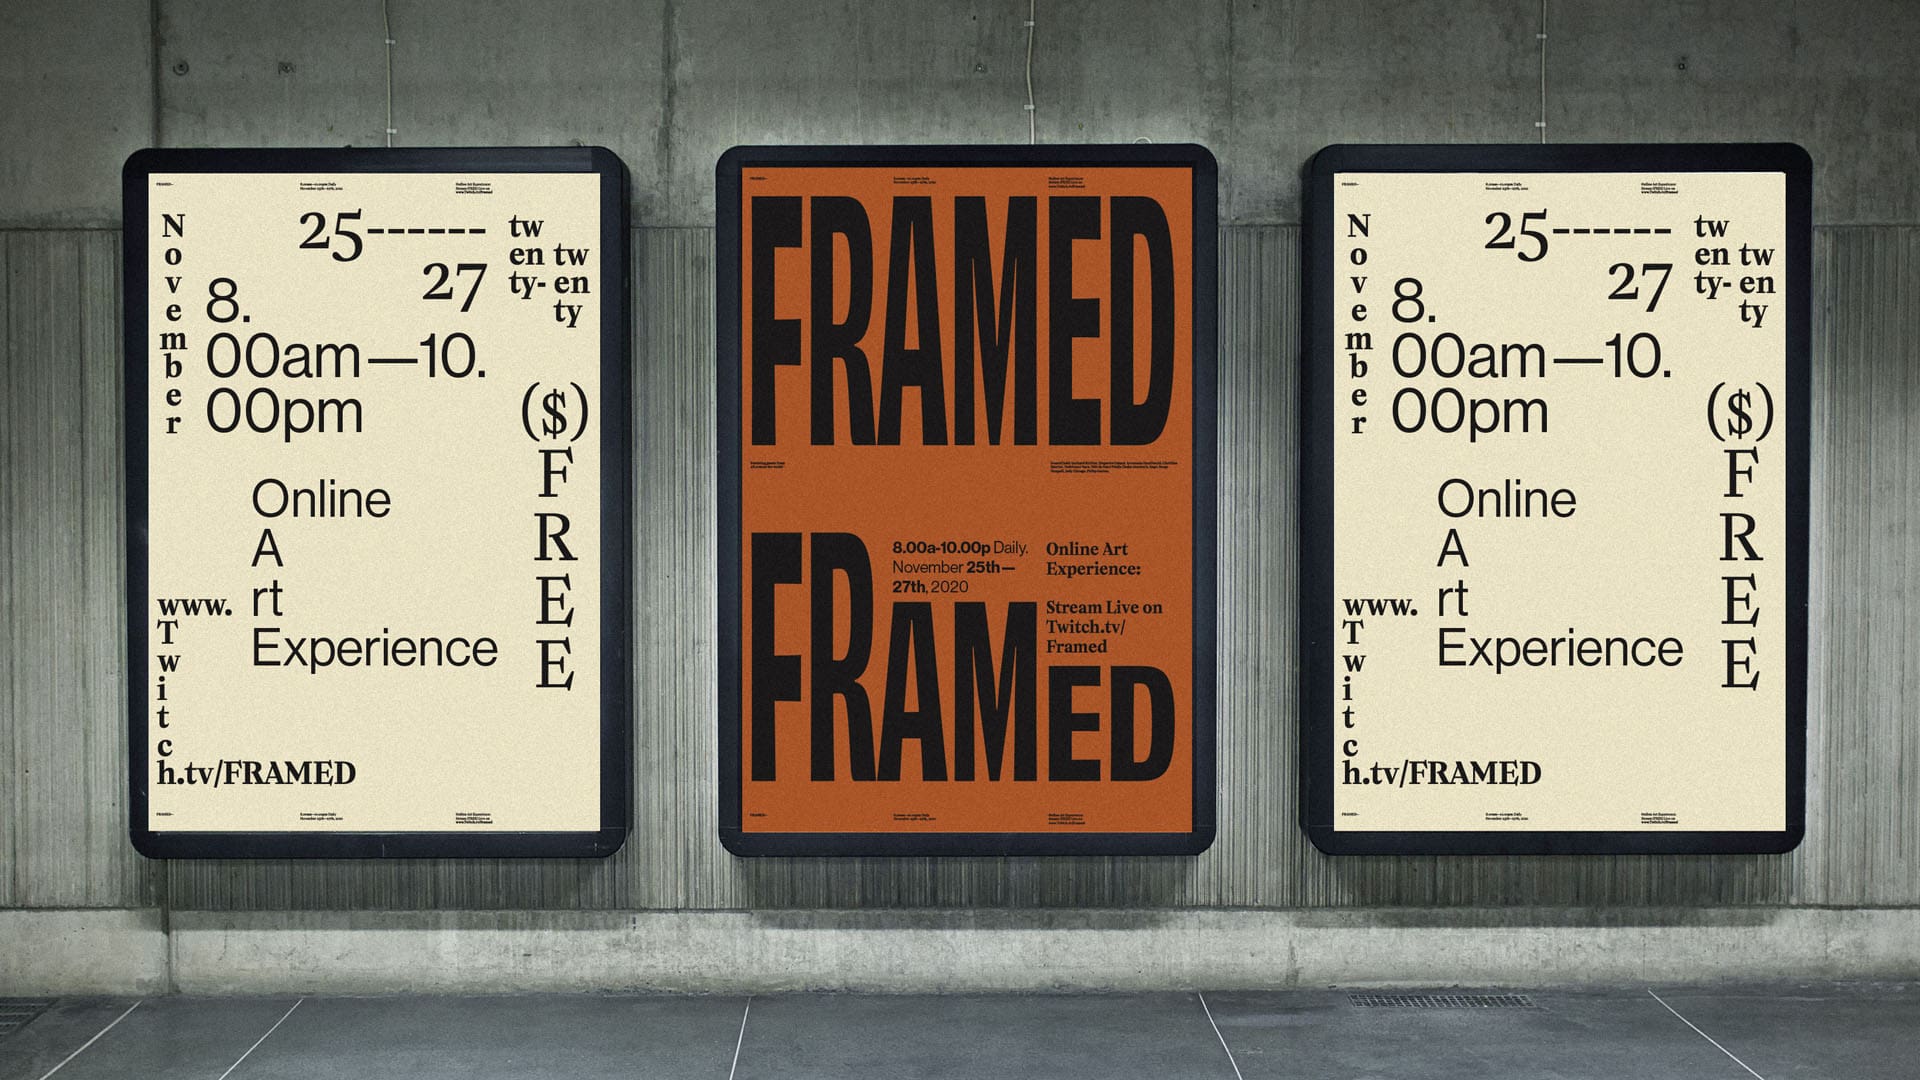 Three posters in black frames on a concrete wall. The two end posters are off-white with black text arranged decoratively around the page. The center poster is orange with black text that reads "Framed" at the top and bottom.